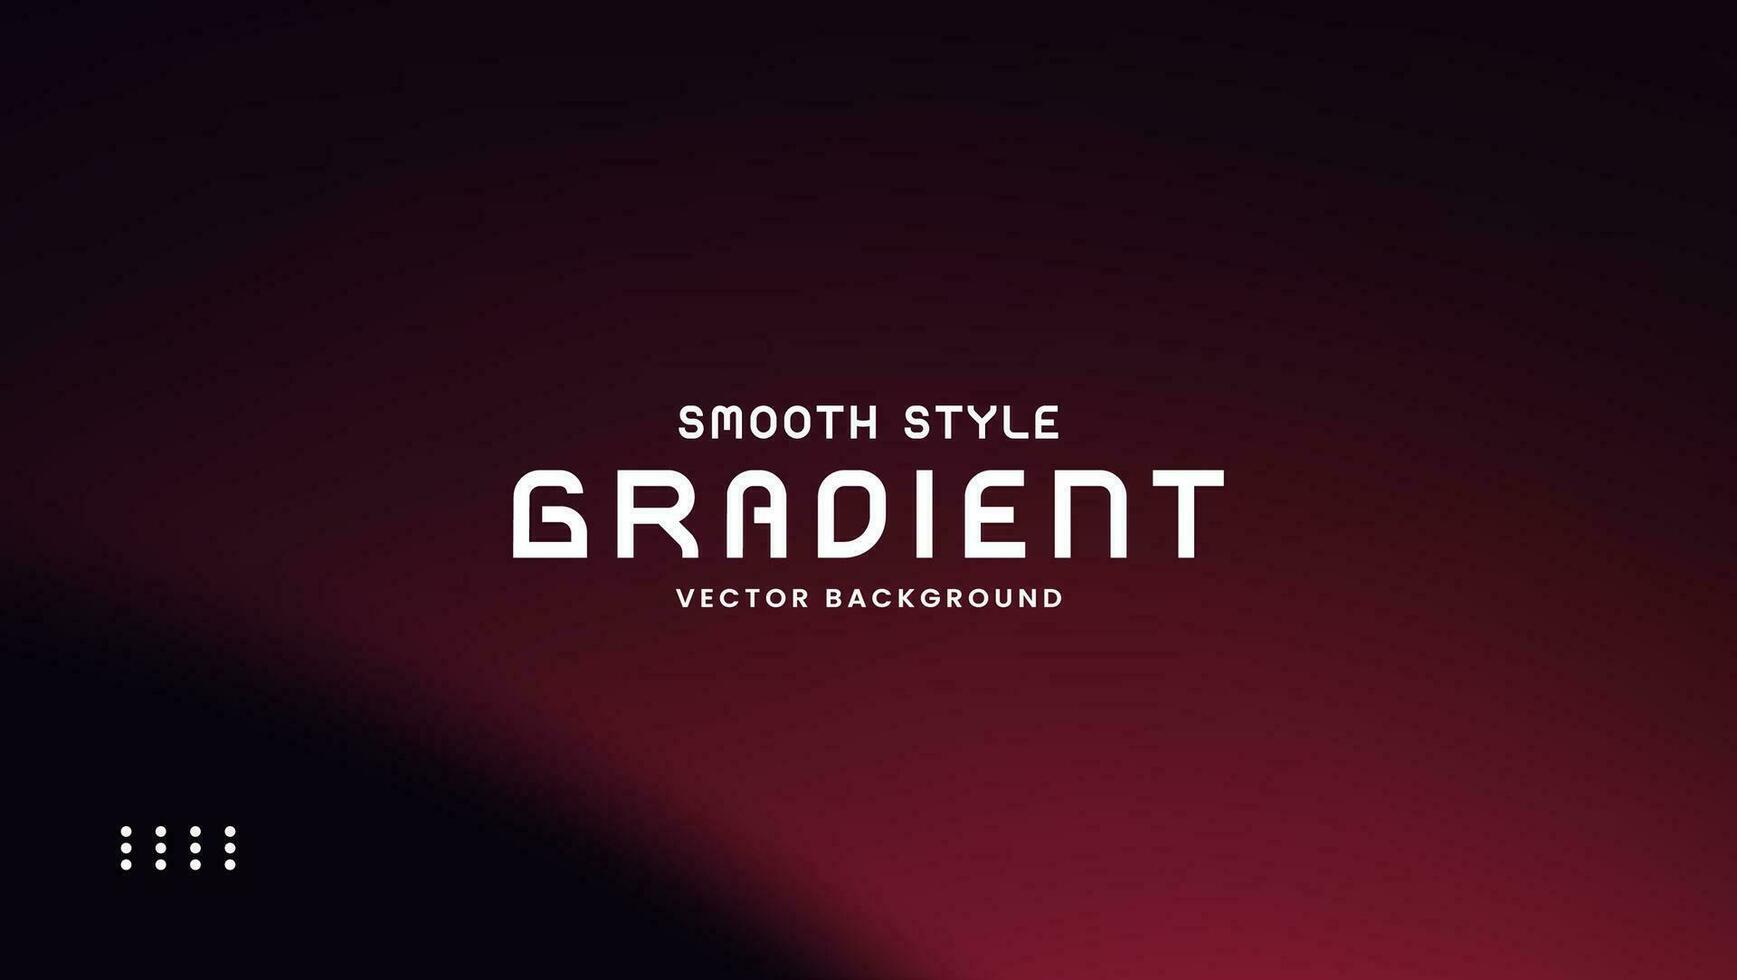 Smooth gradient background with black and red color vector